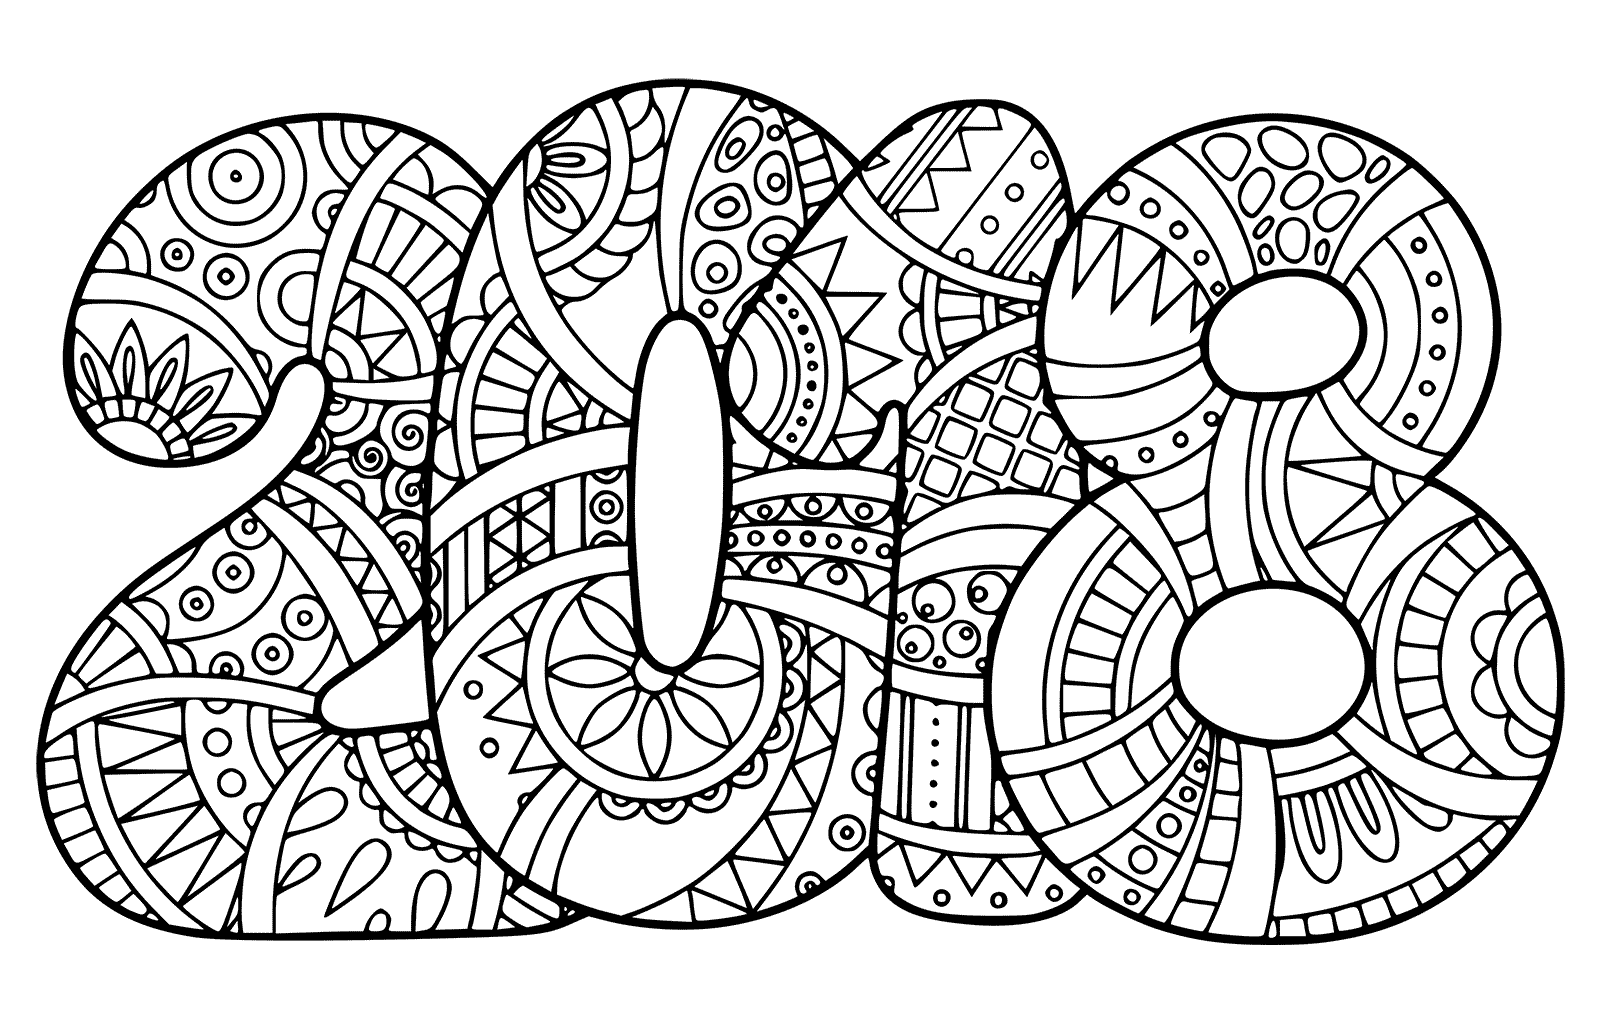 New Year 2018 Coloring Page Doodle